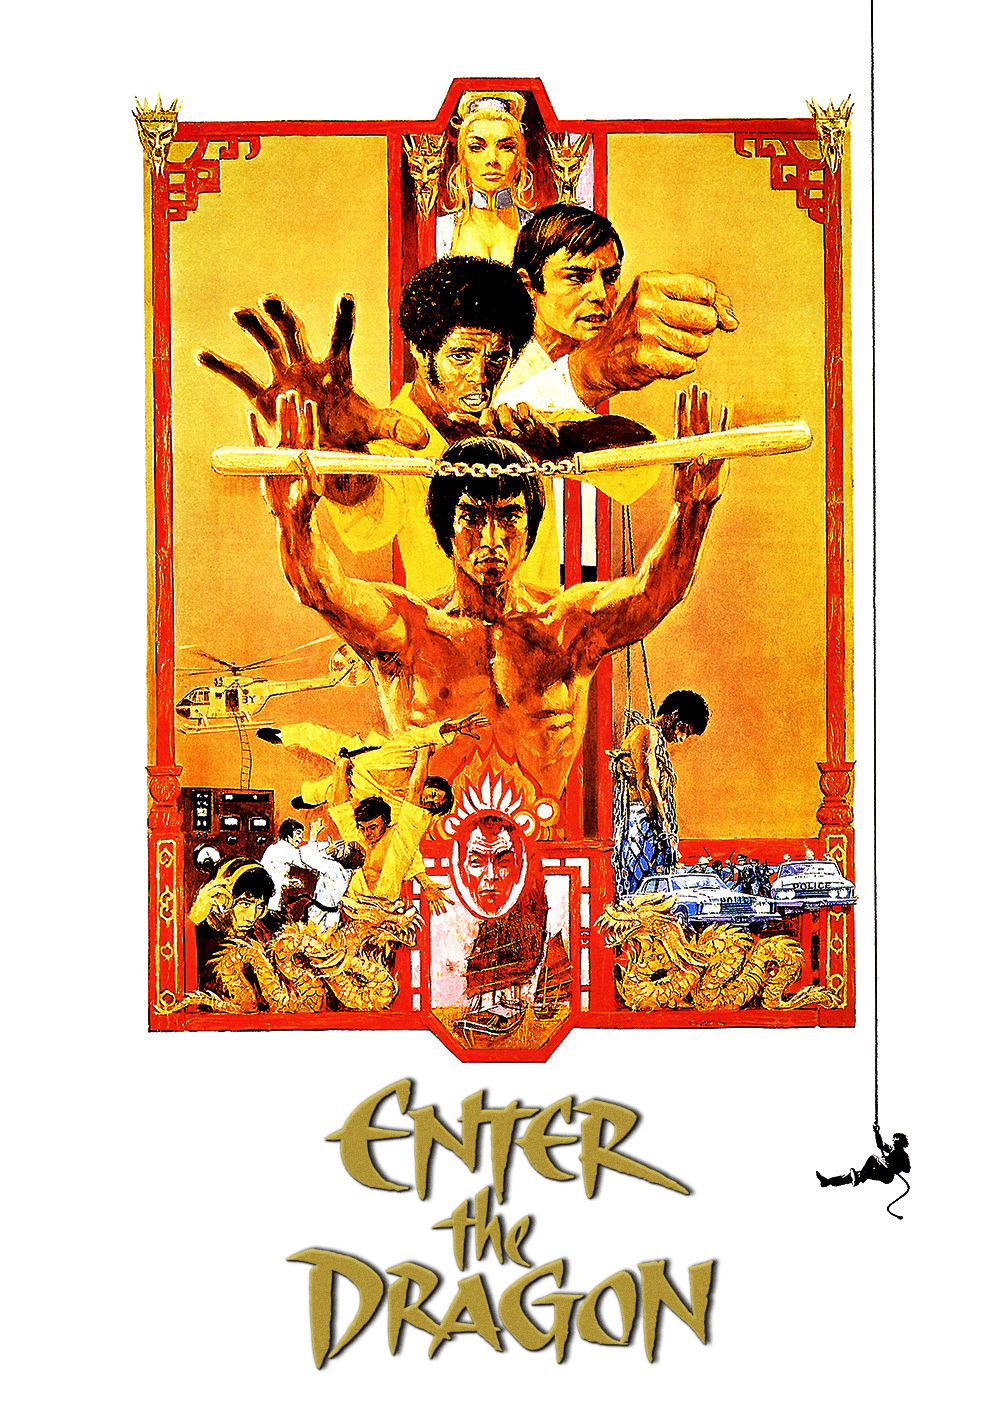 Enter the Dragon Picture